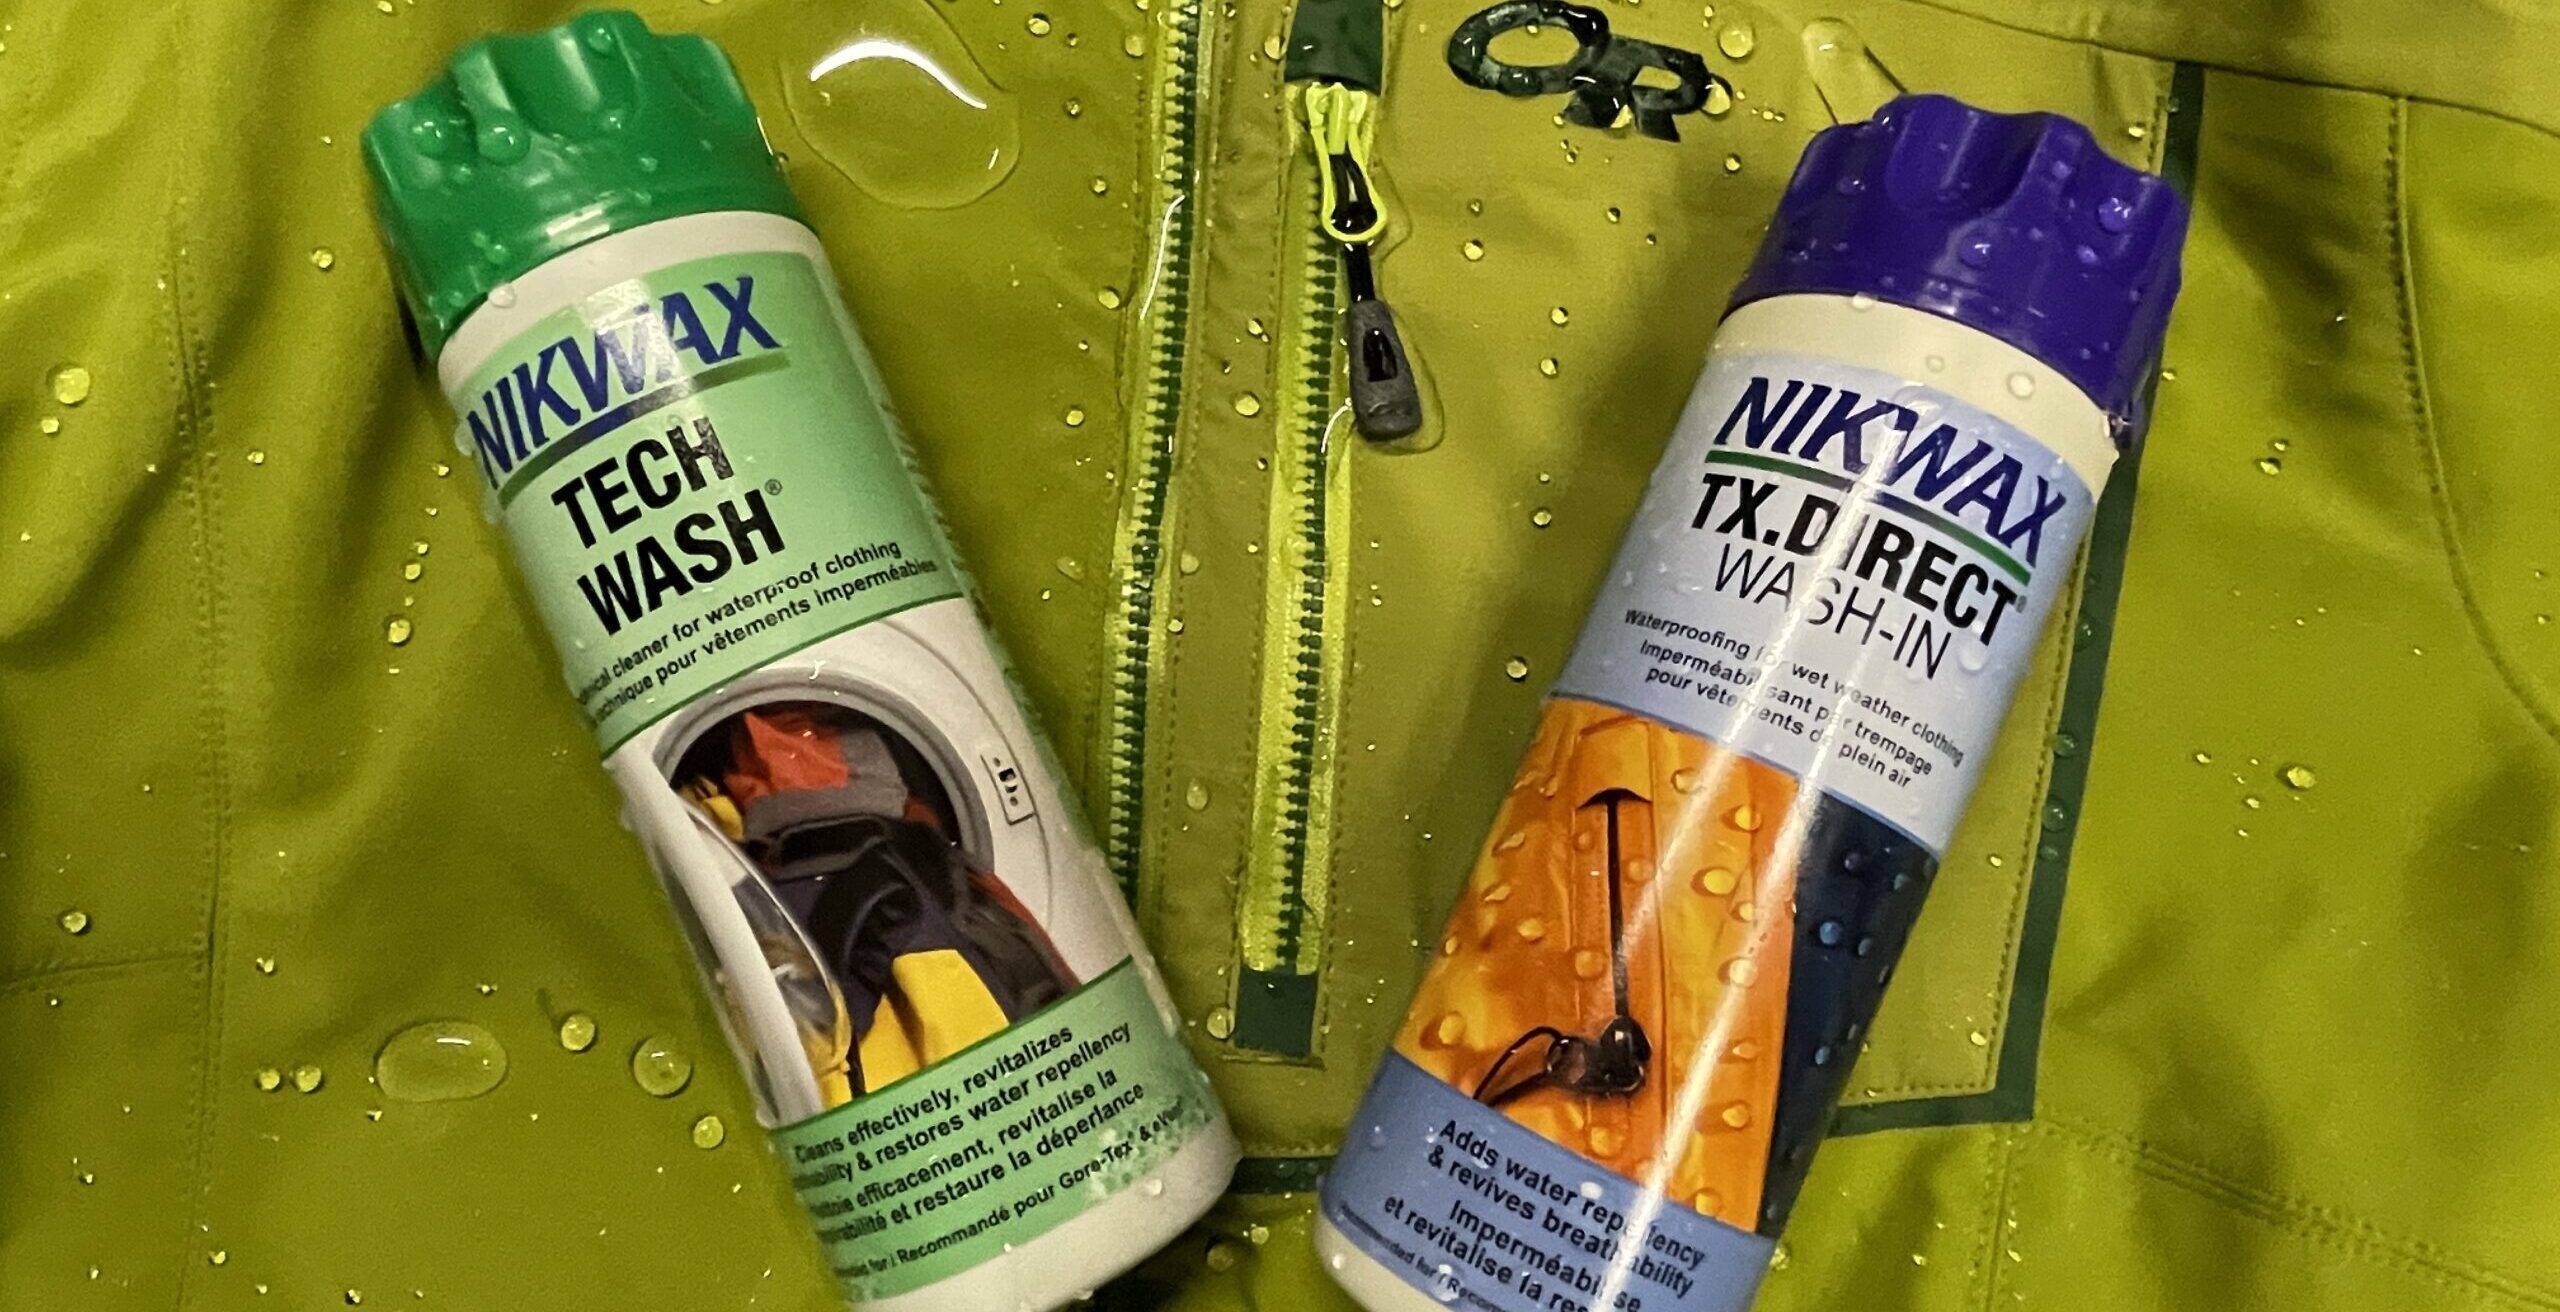 DWR - Durable Water Repellent and you — Outdoor Gear Repair - The Fixed Line